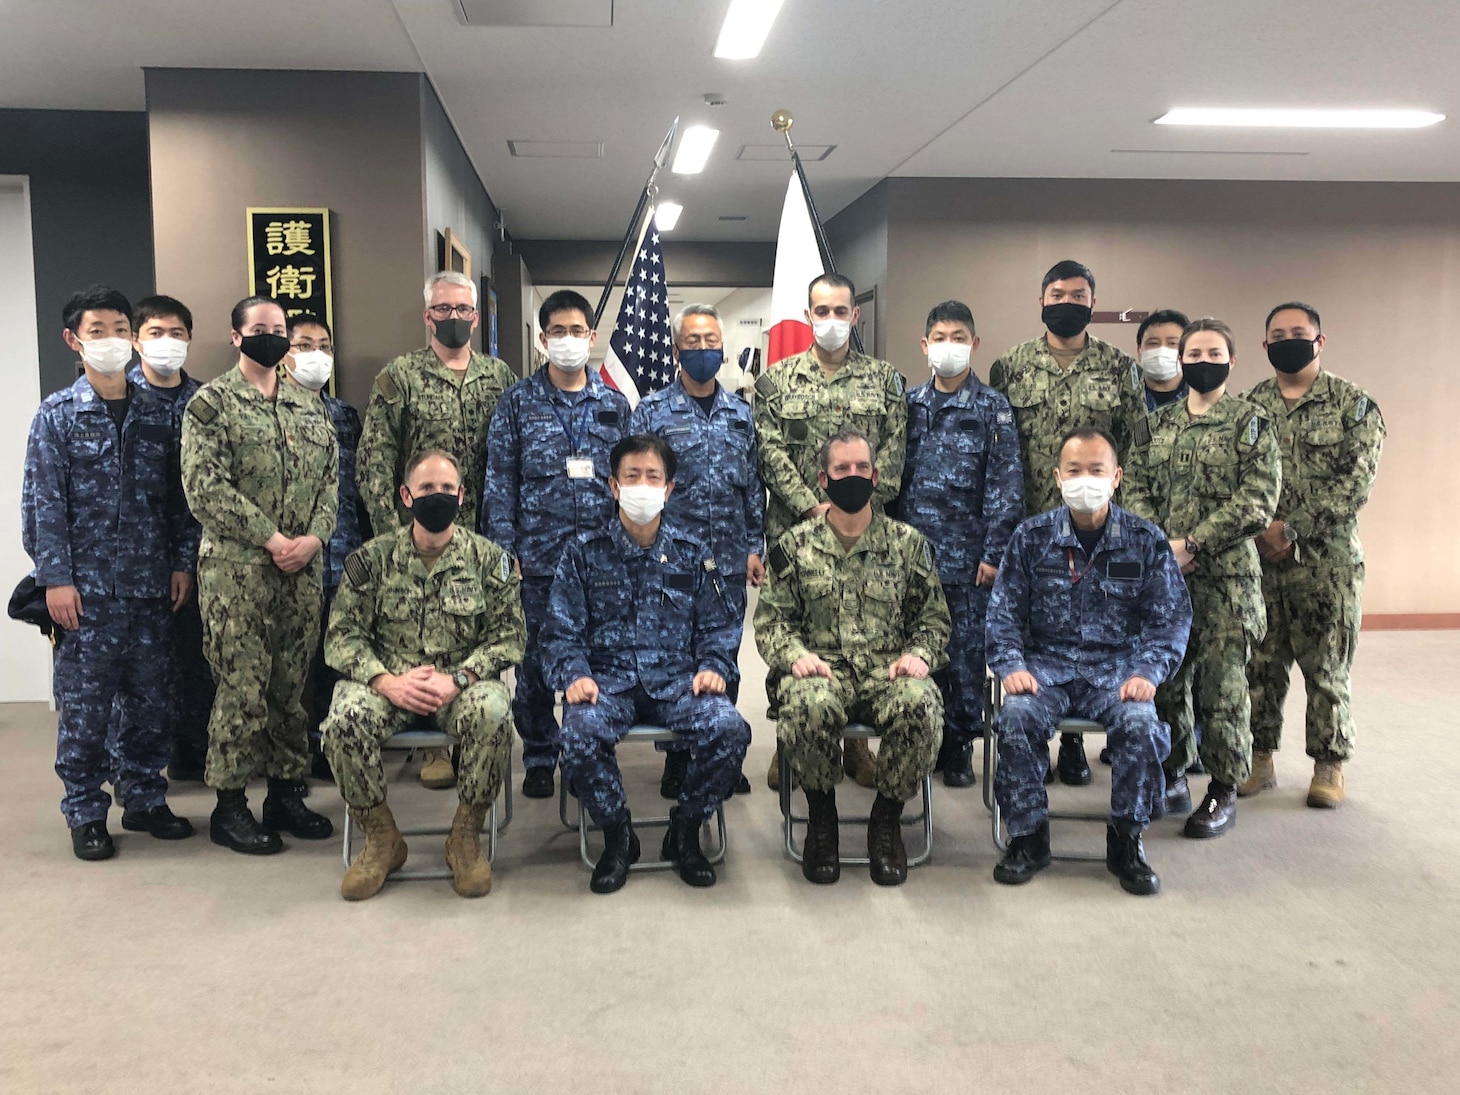 Vice Adm. SAITO Akira, Commander, Fleet Escort Force, Japan Maritime Self-Defense Force (center left, seated) and U.S. Navy Rear Adm. Michael Donnelly (center right, seated), Commander, Task Force (CTF) 70, pose for a photo with members of their staff following Flag Talks. Staff talks allow commanders to plan for future operations, work through challenges or lessons learned, while building towards greater collaboration when their forces operate together in the maritime environment. CTF 70 is forward-deployed to the U.S. 7th Fleet area of operations in support of a free and open Indo-Pacific.